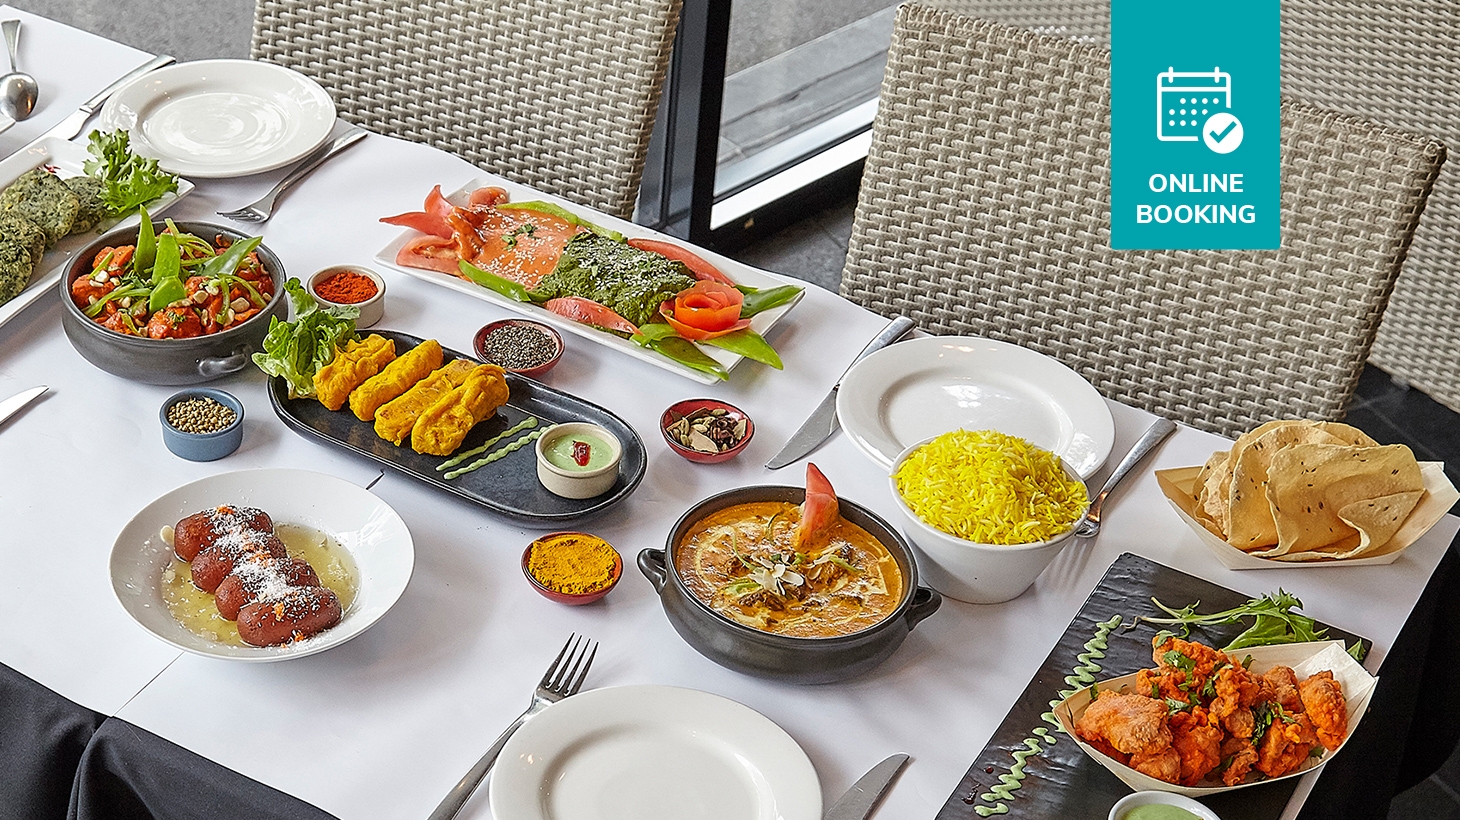 50% Off Credit to Spend on Fine Indian Dining! | Scoopon